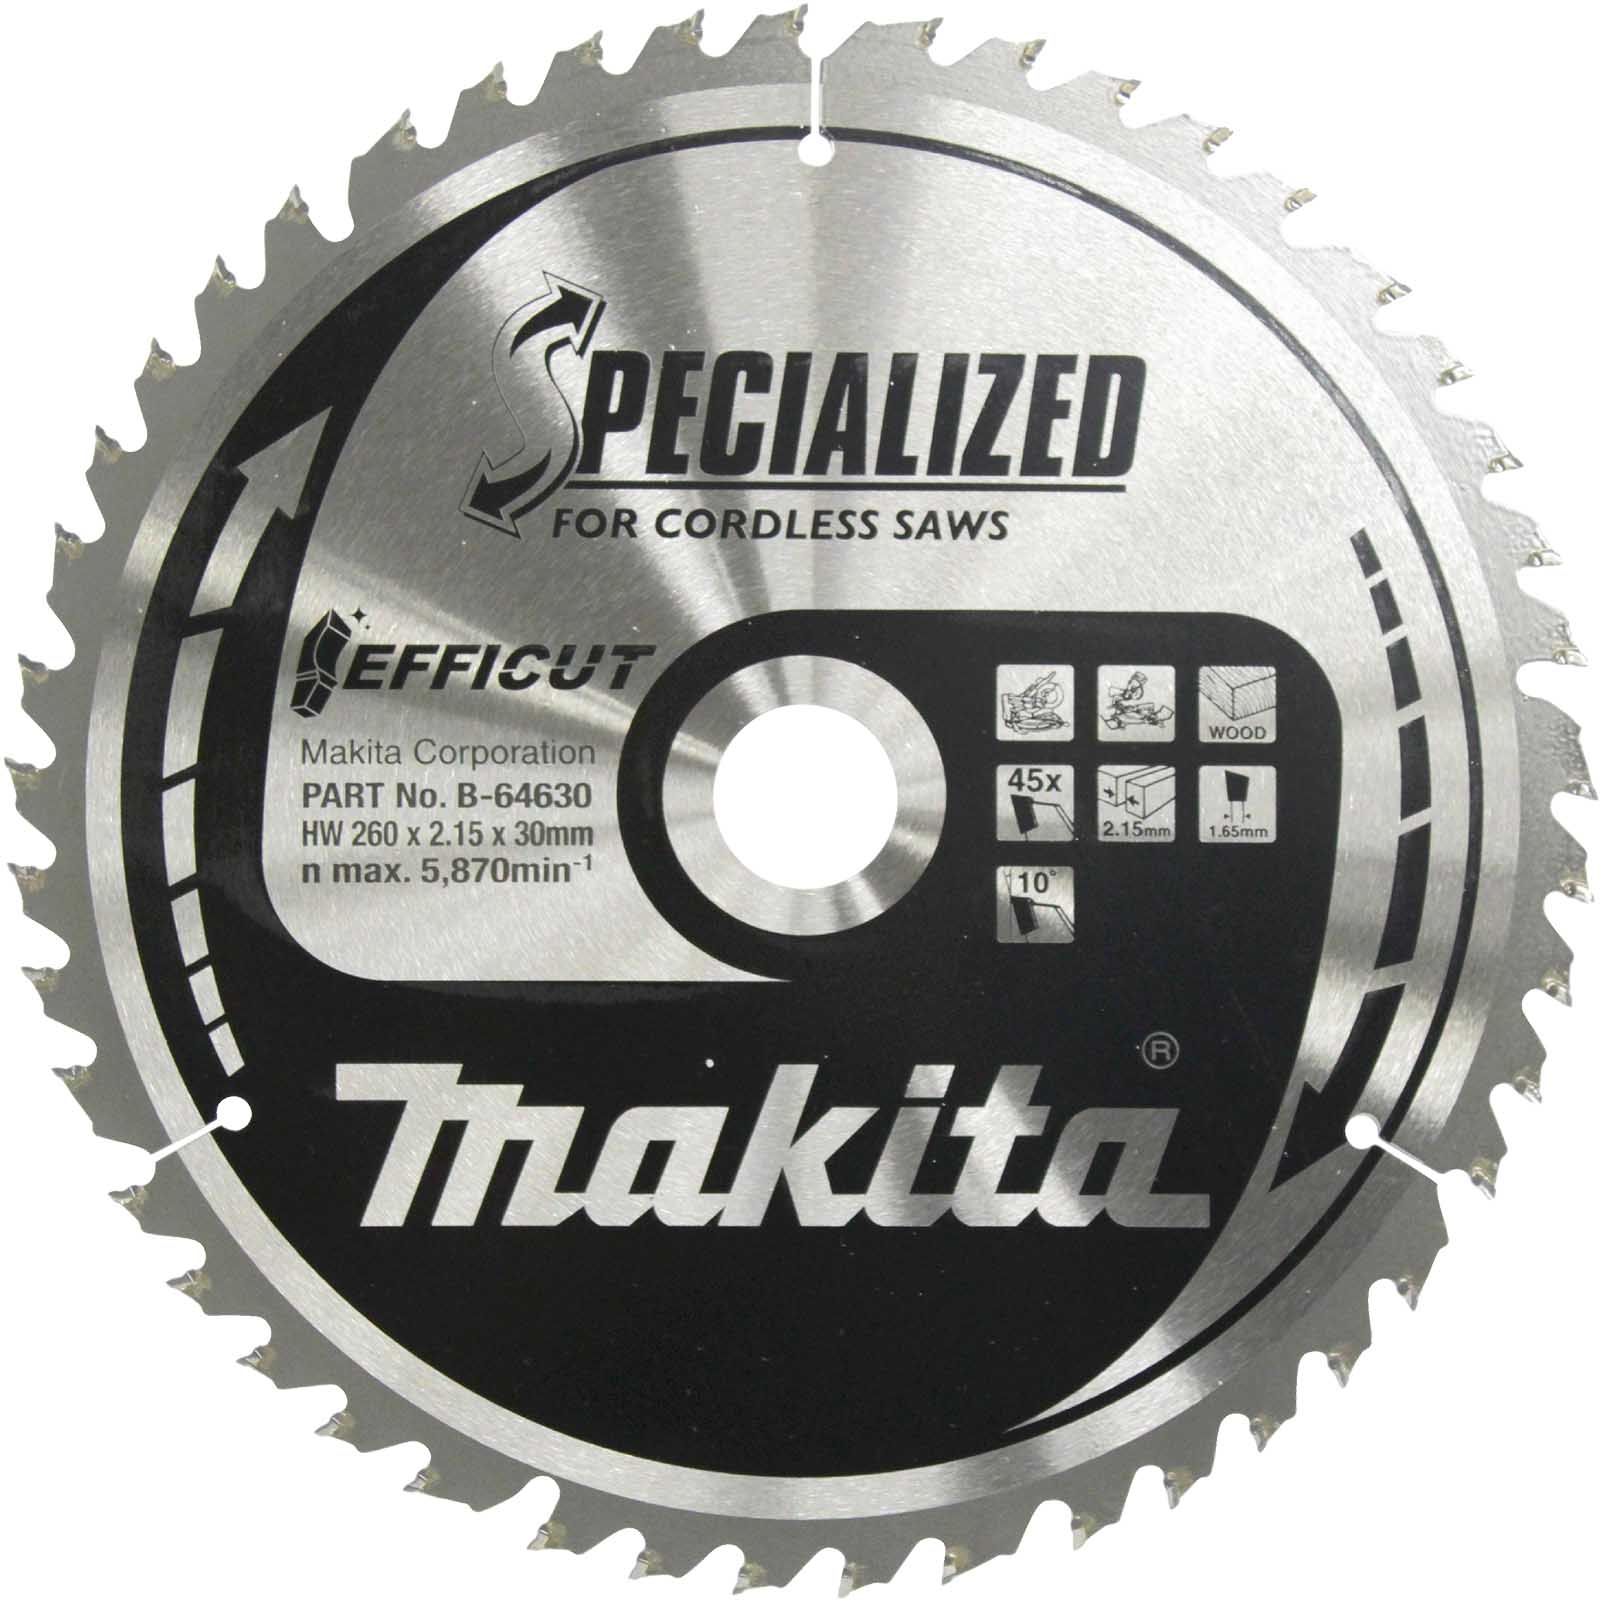 Photos - Power Tool Accessory Makita SPECIALIZED Efficut Circular Saw Blade for Wood Cutting 260mm 45T 3 